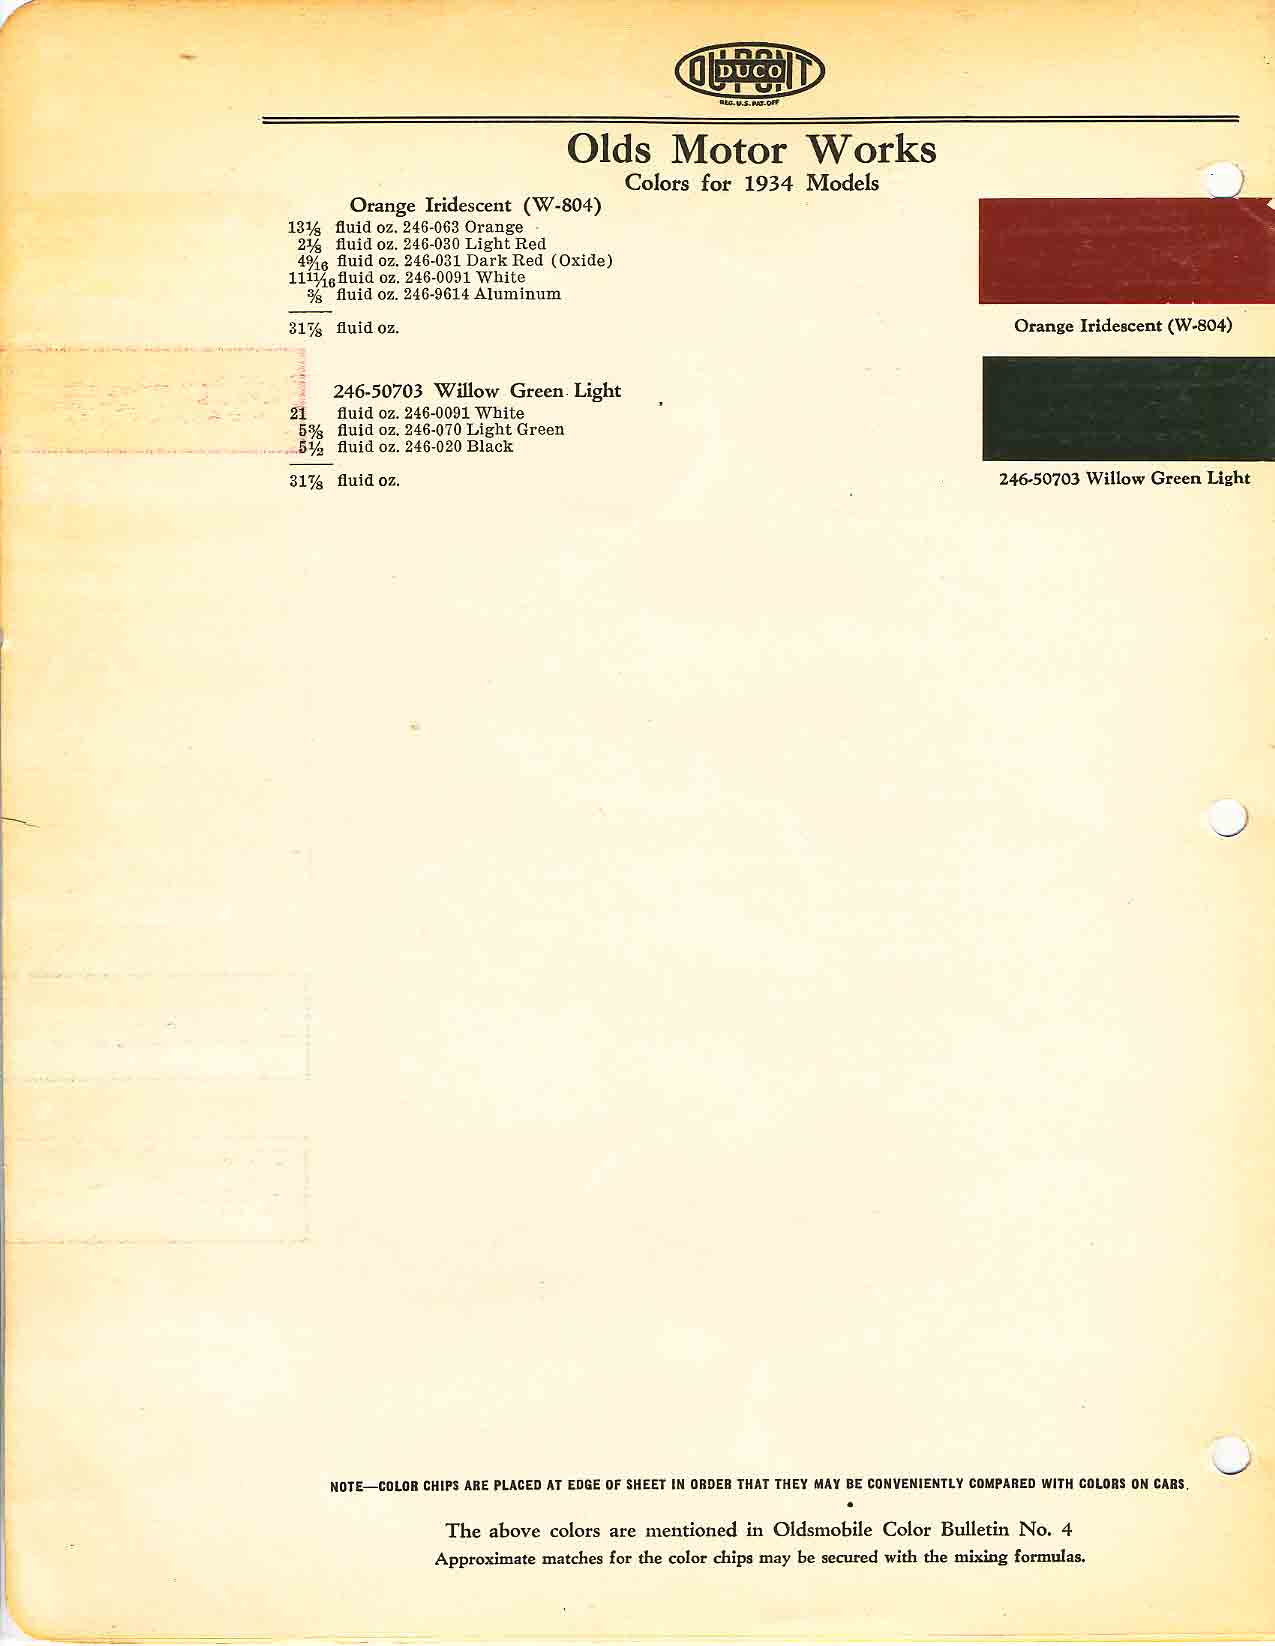 Colors and codes used on Oldsmobile Vehicles in 1934